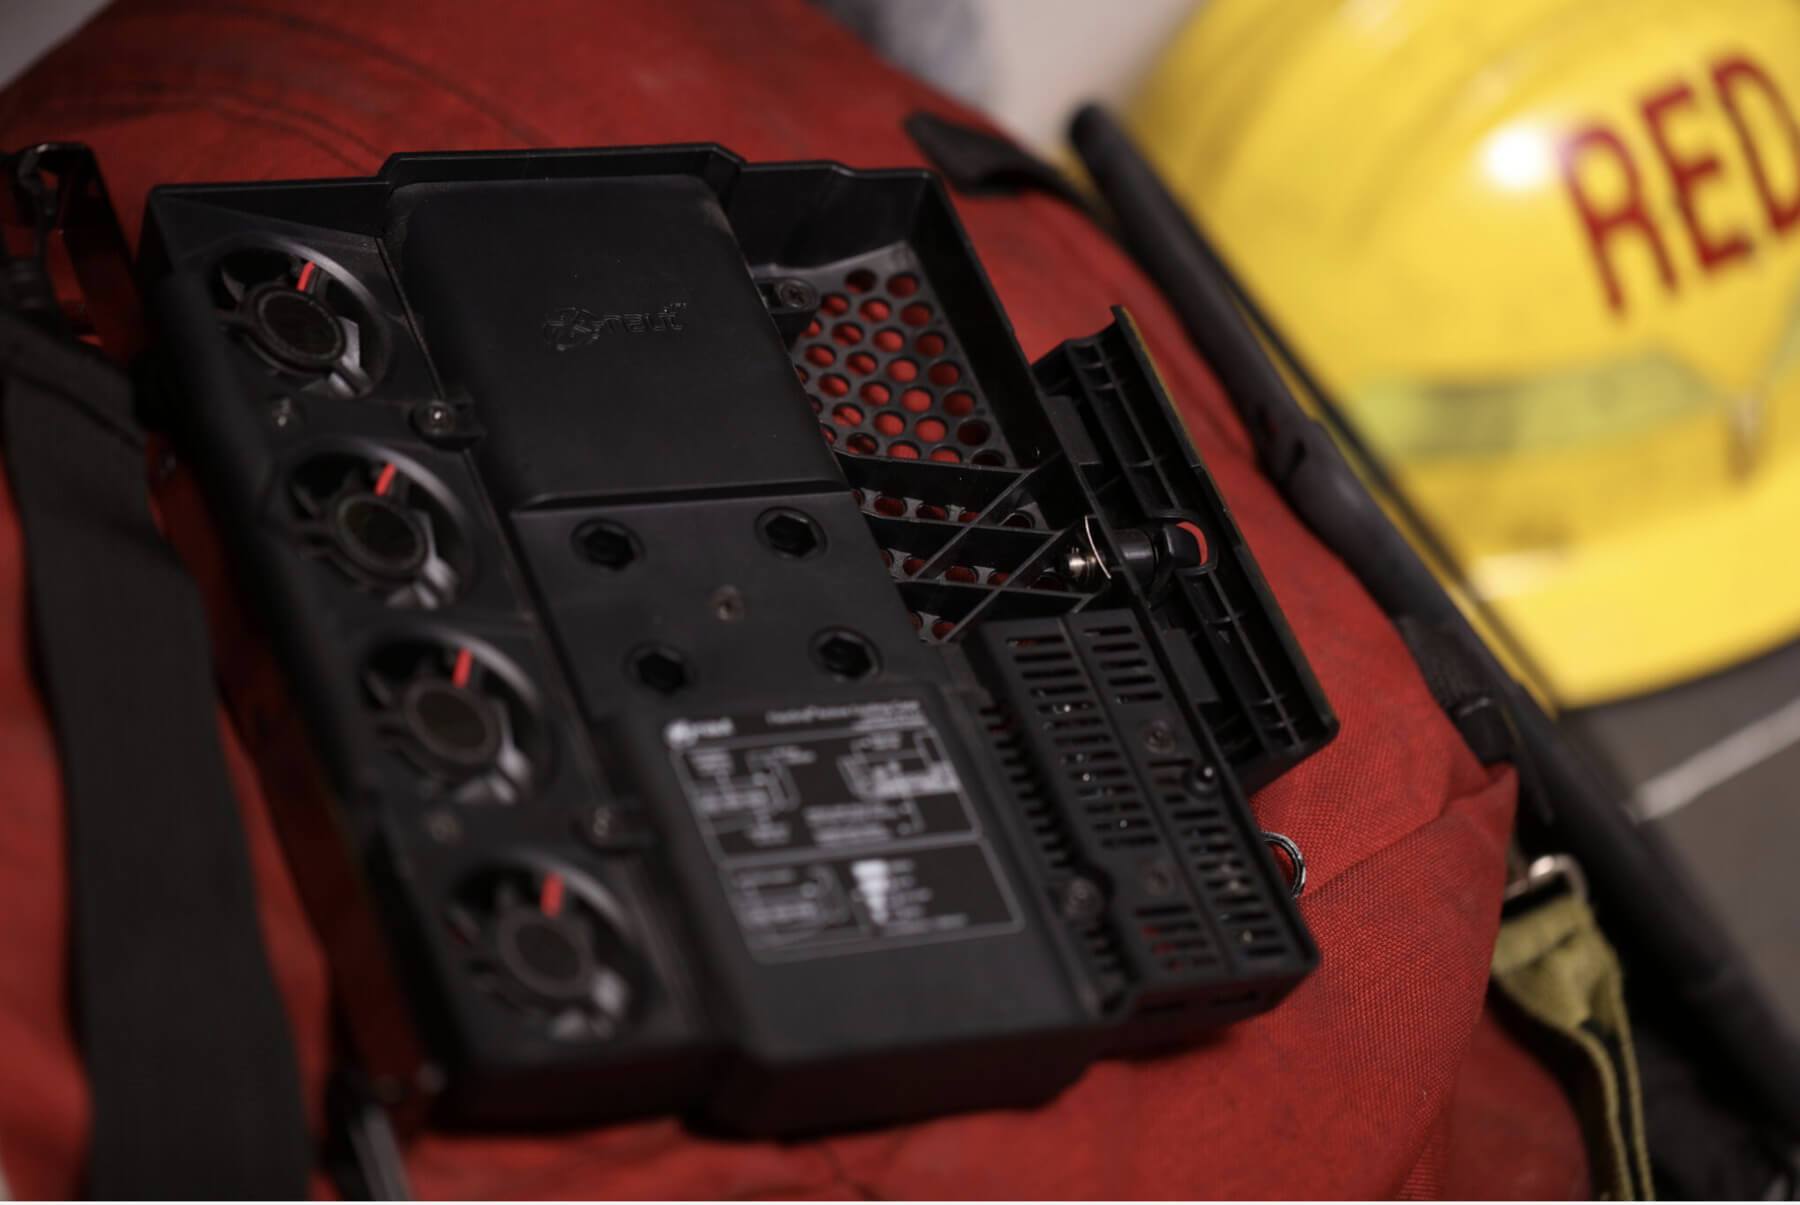 flexgrip cooling case laid in a red bag